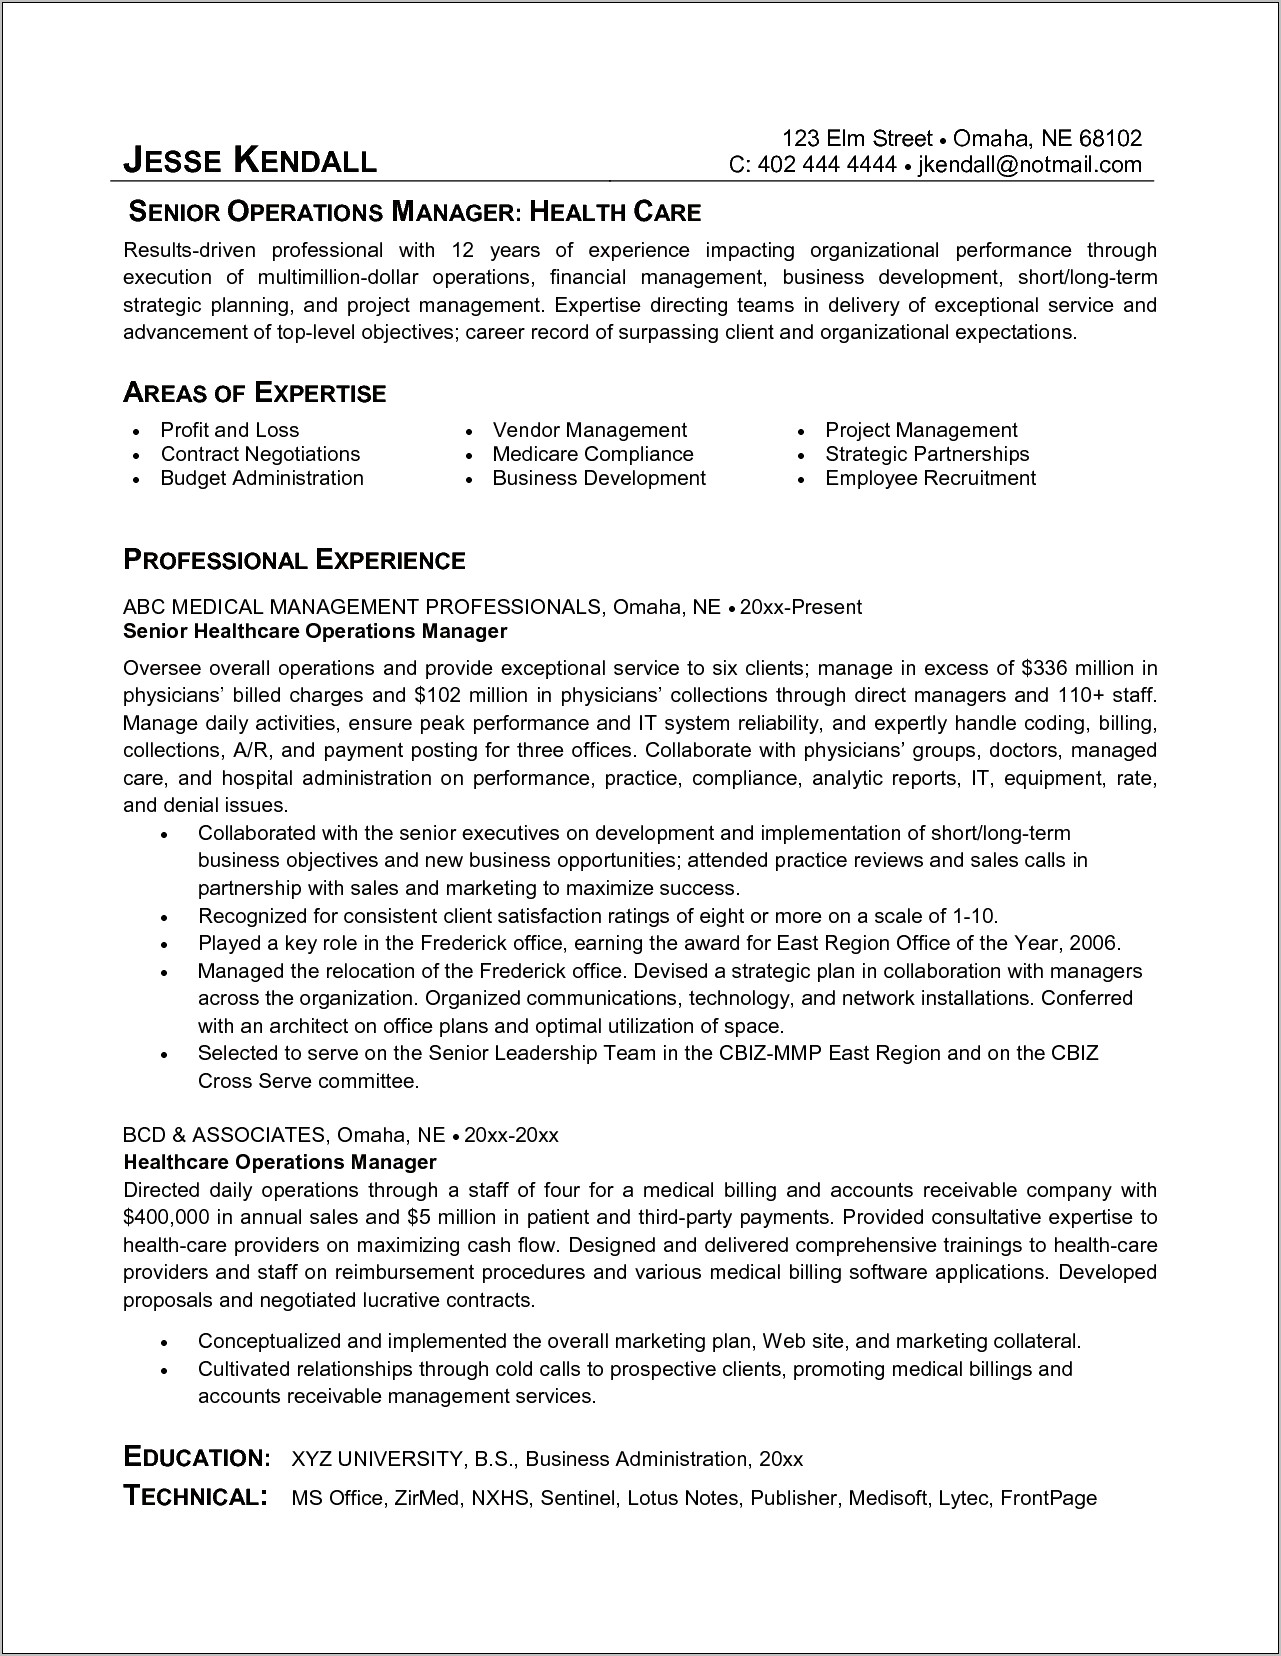 General Resume Objective Examples Mental Health